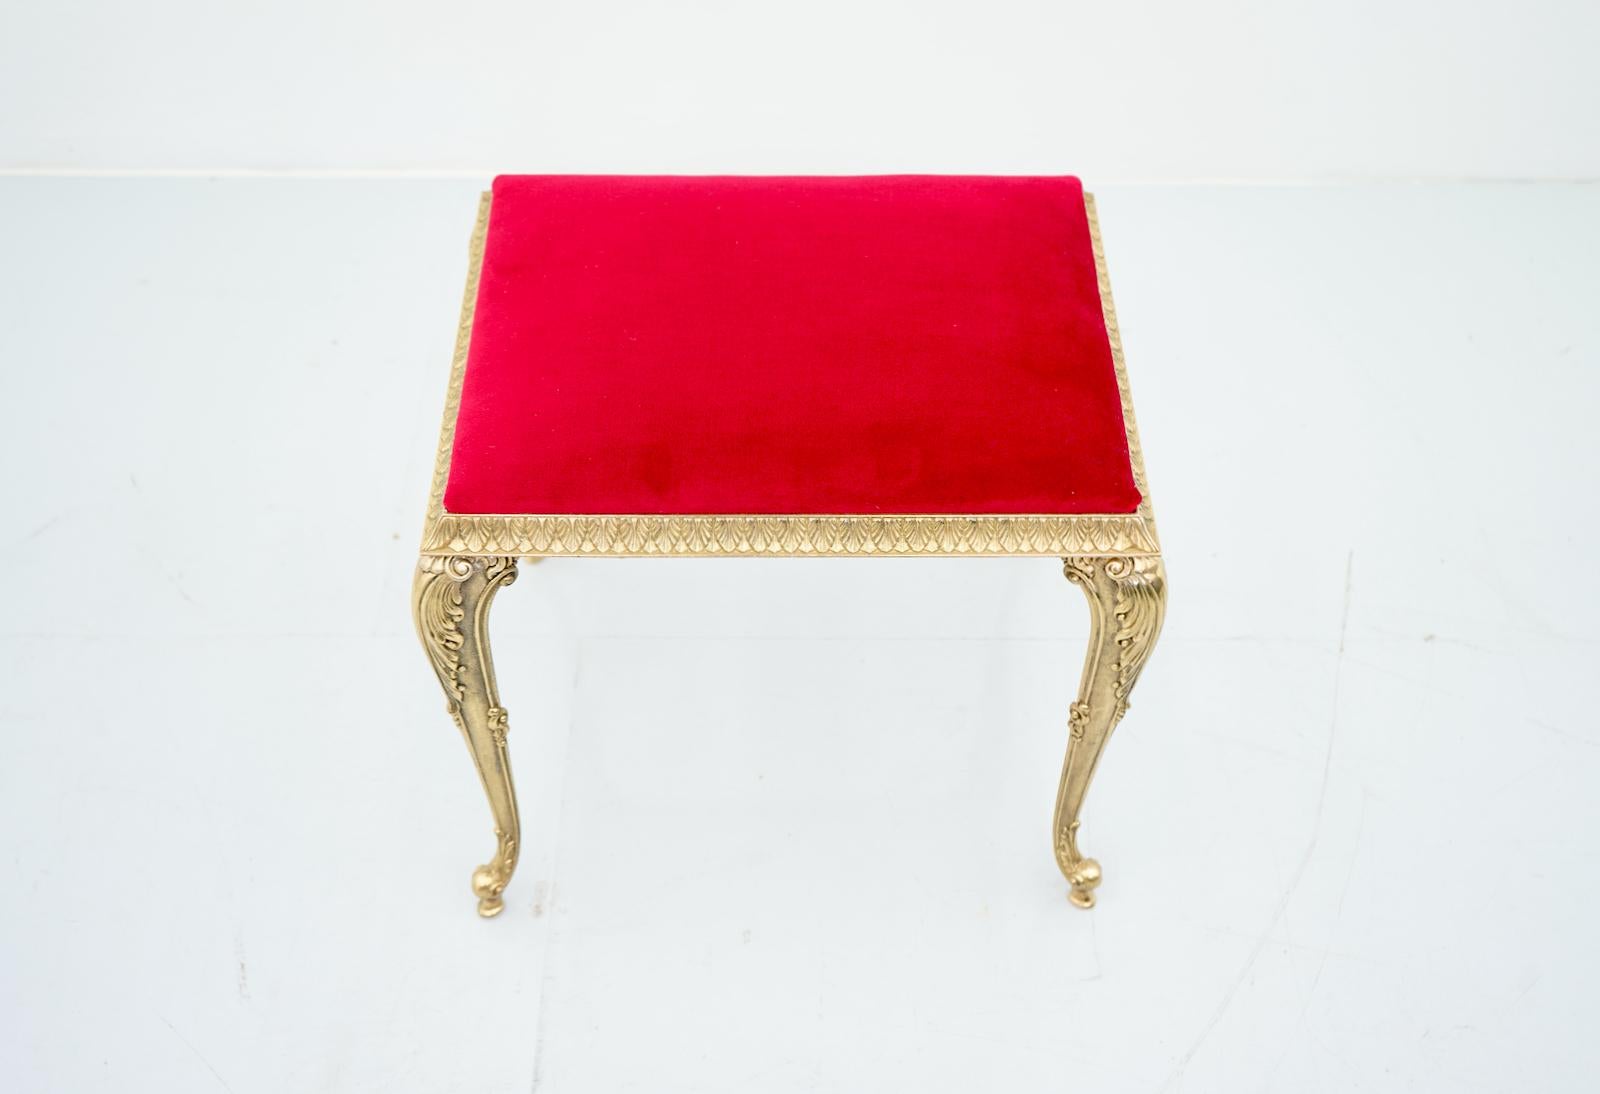 Decorative Brass Stool with Red Fabric, circa 1970s For Sale 1